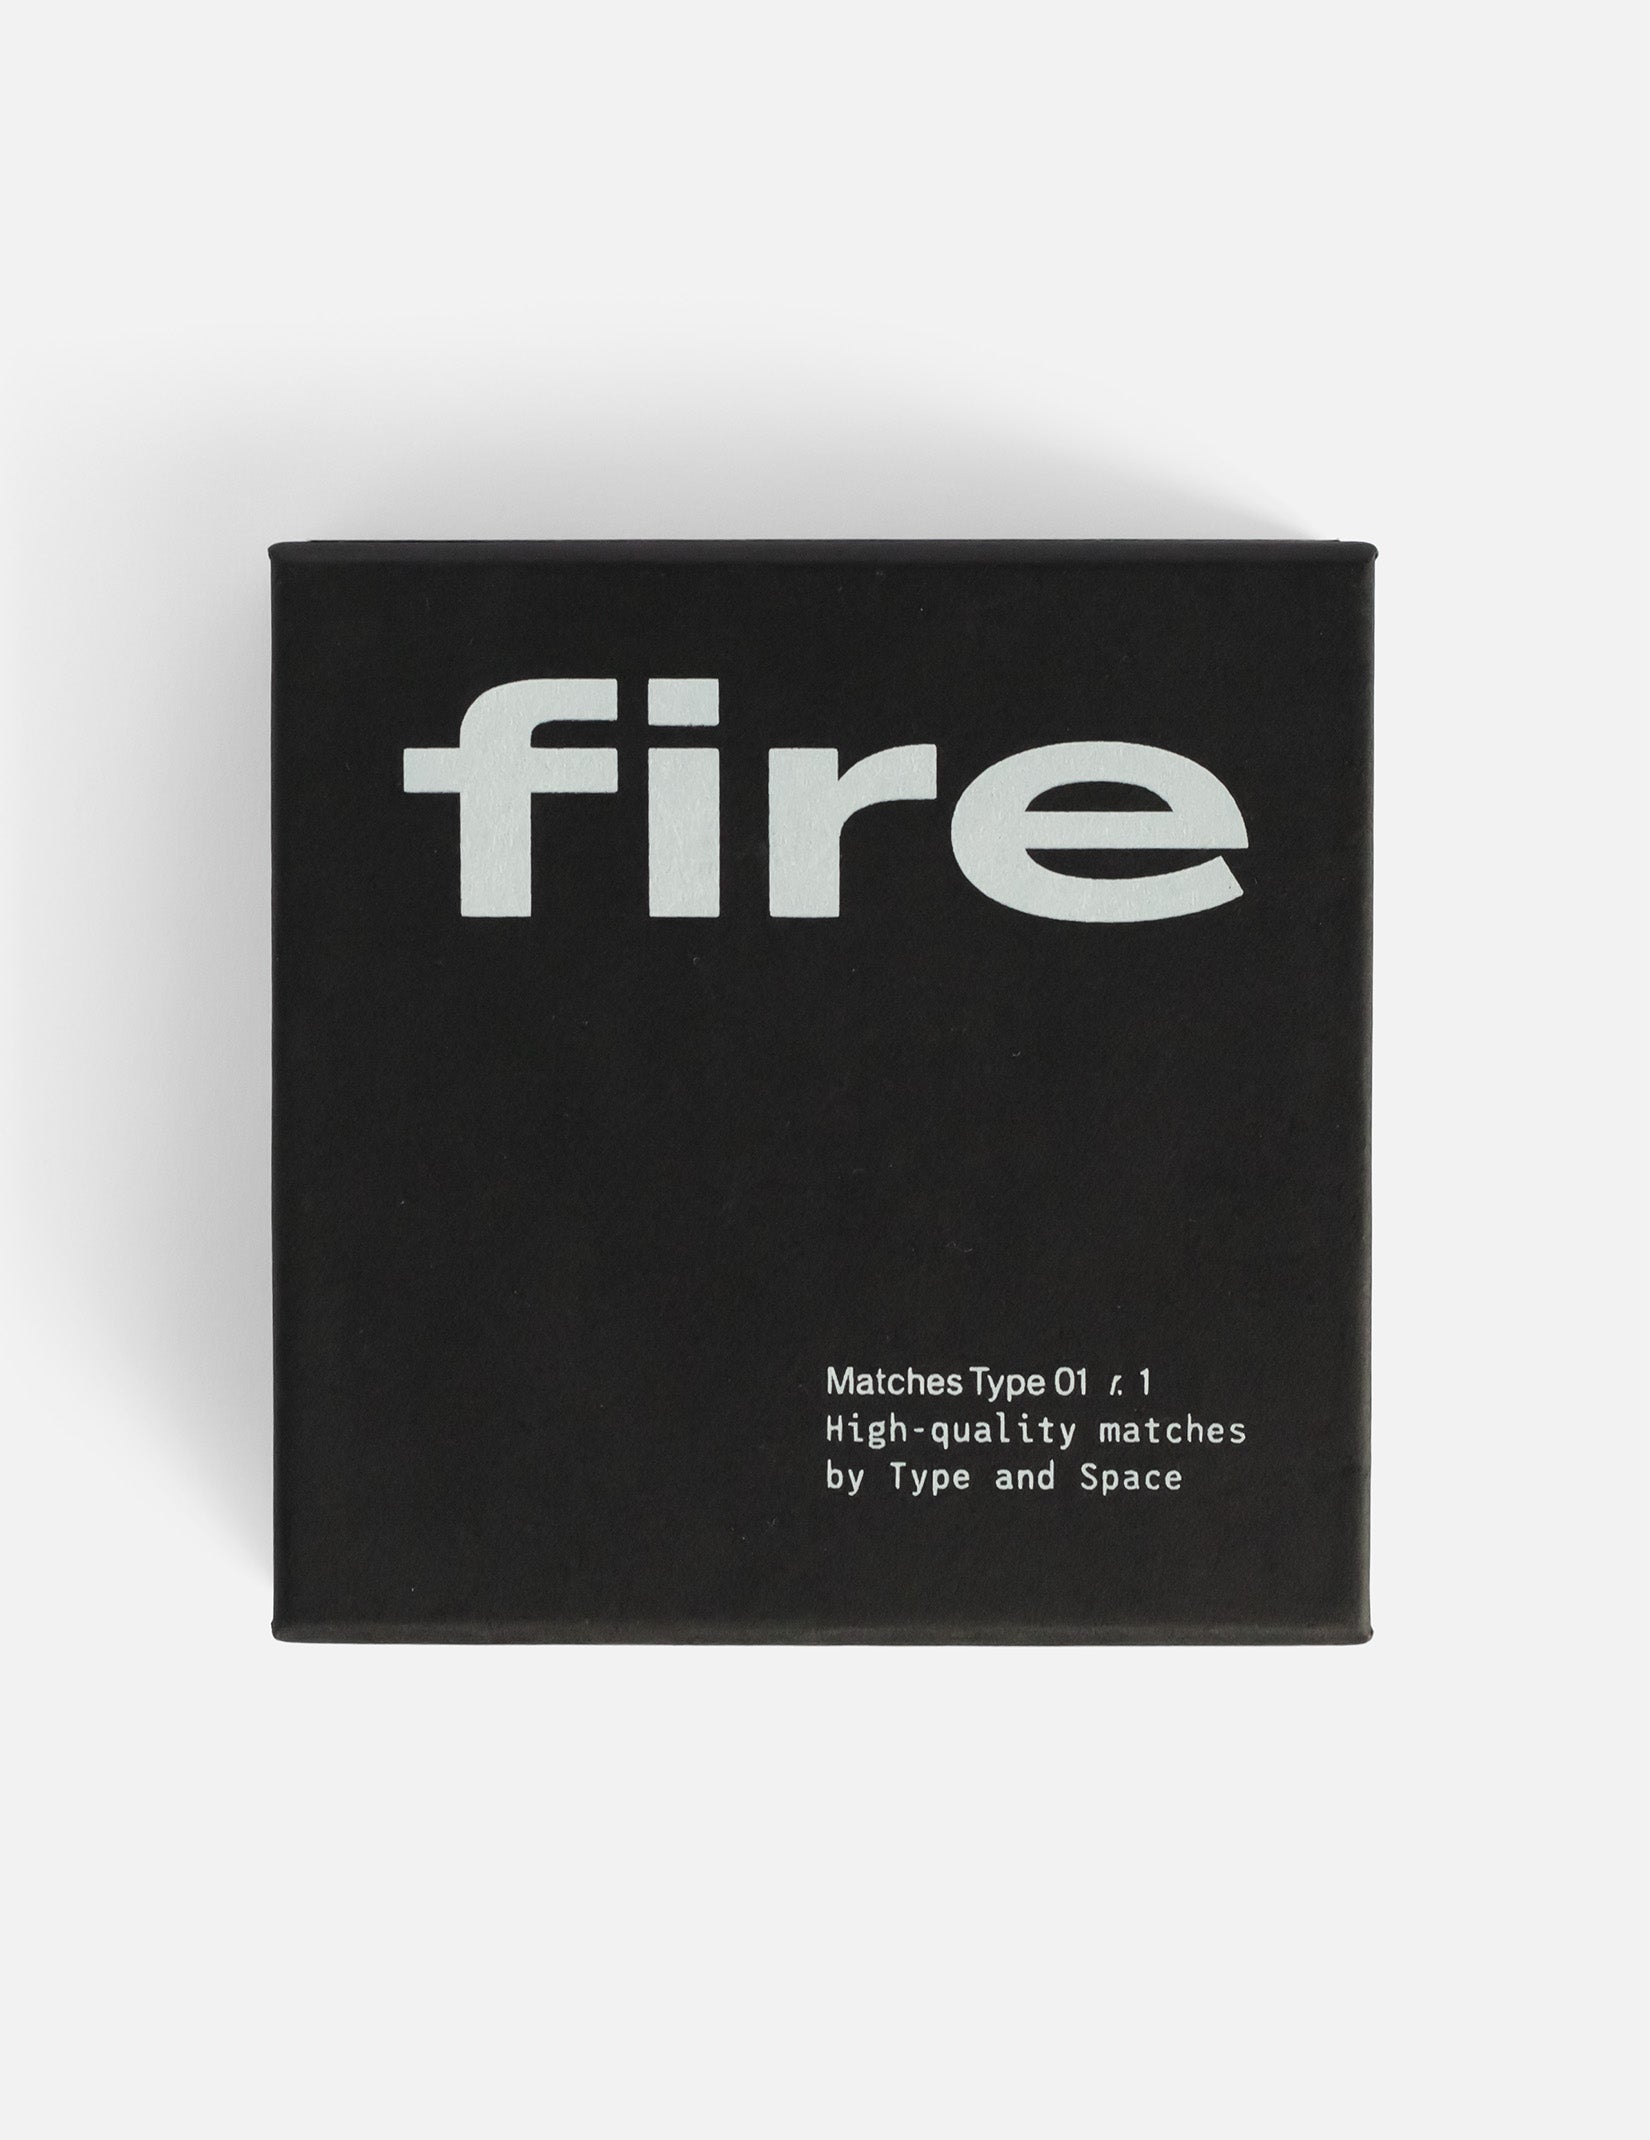 Large square black matchbox. Print that says 'Fire' in large letters and 'Matchbox Type 01 r1, high-quality matches by Type and Space' in small letters